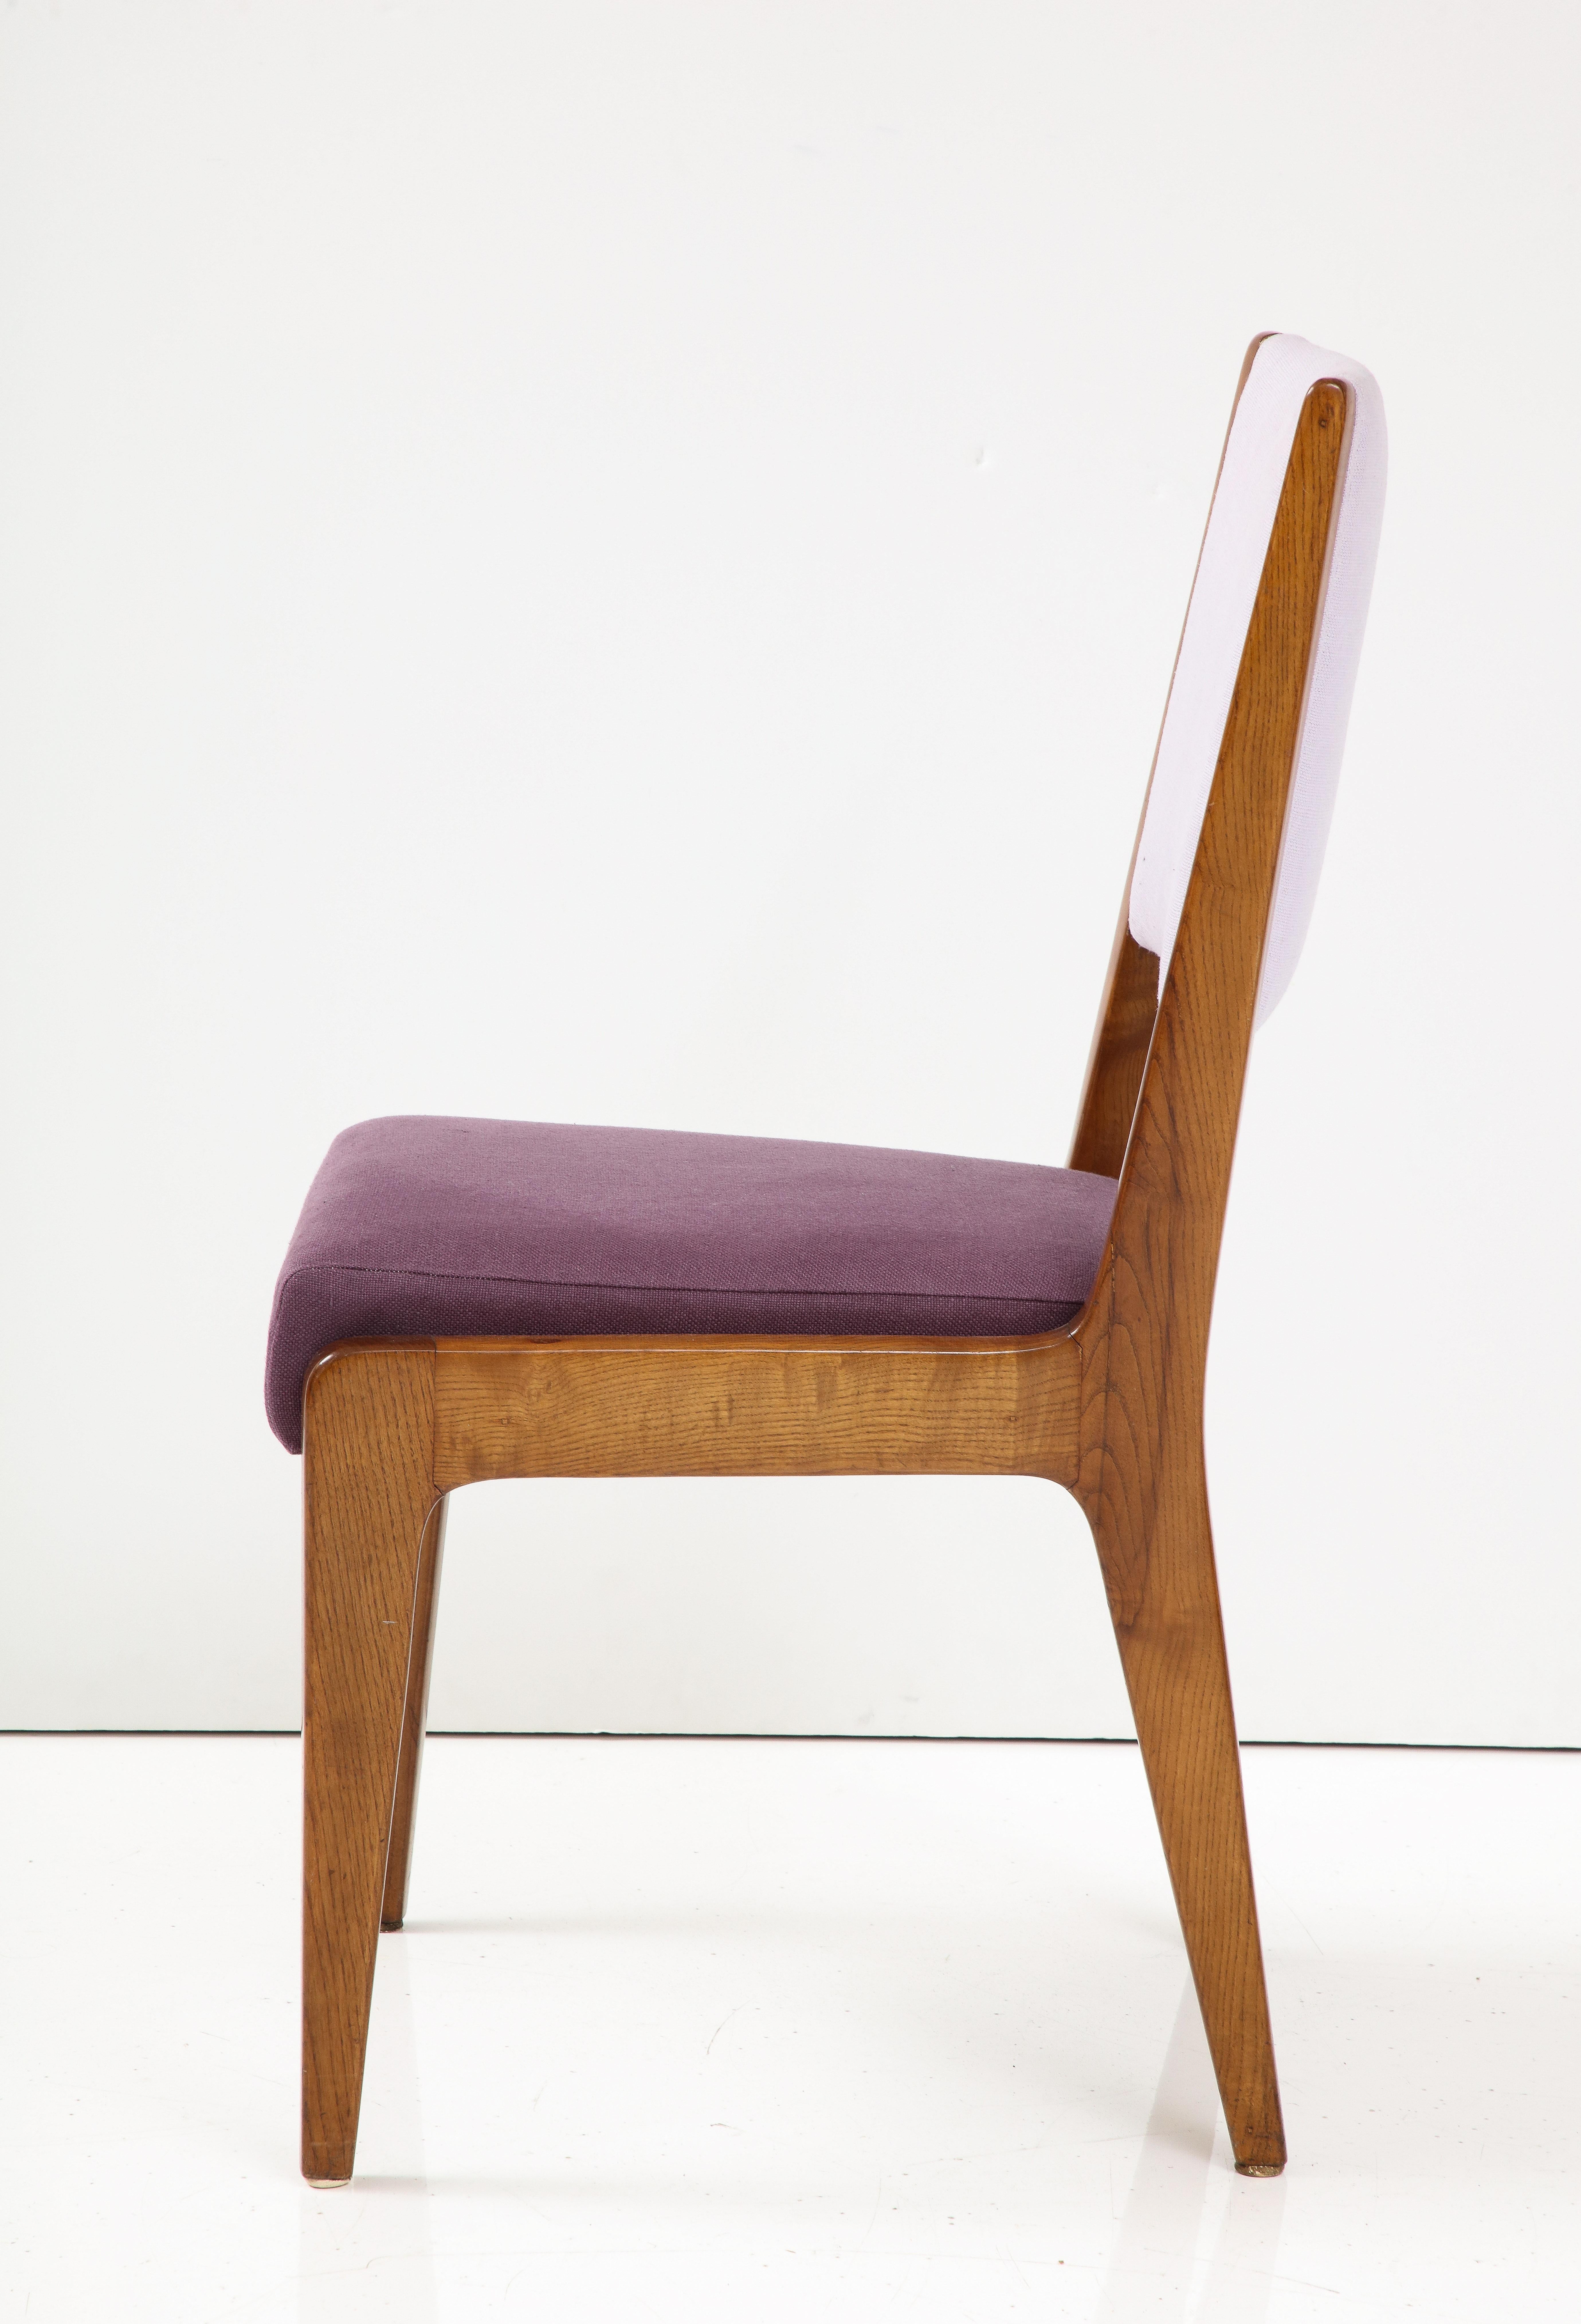 Linen Upholstered Oak Chair by Gio Ponti, Italy, circa. 1950s For Sale 7